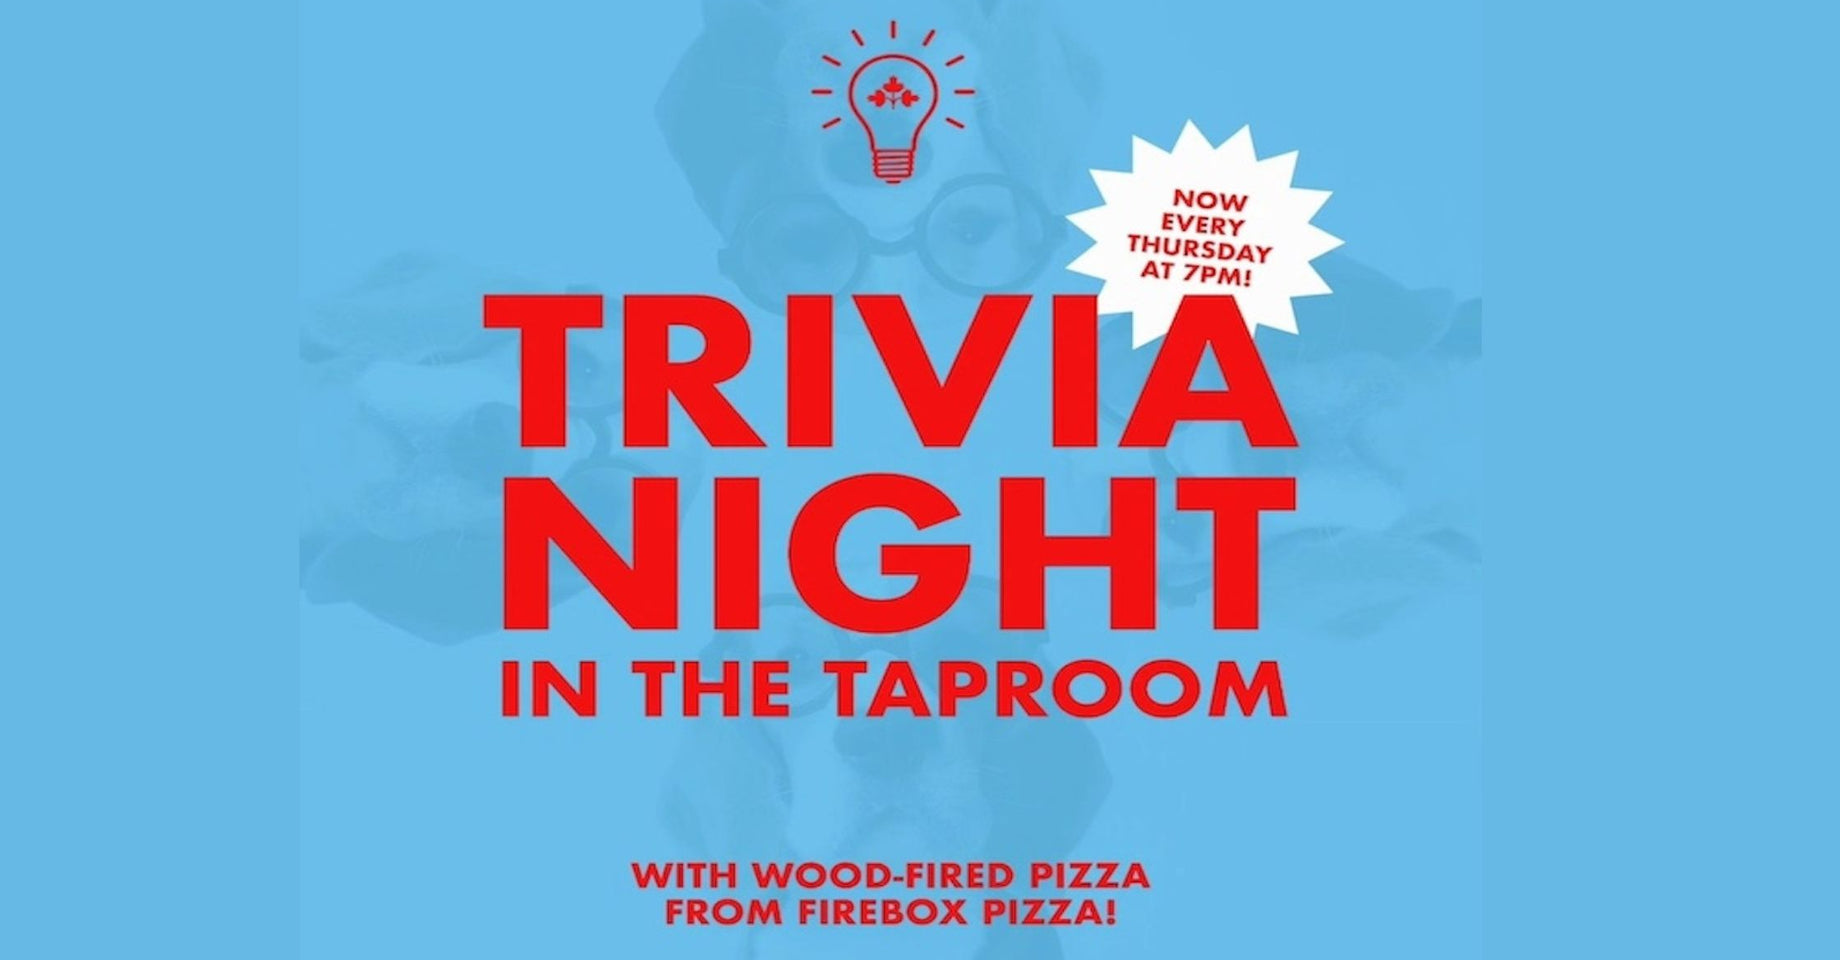 Trivia Night In The Taproom!